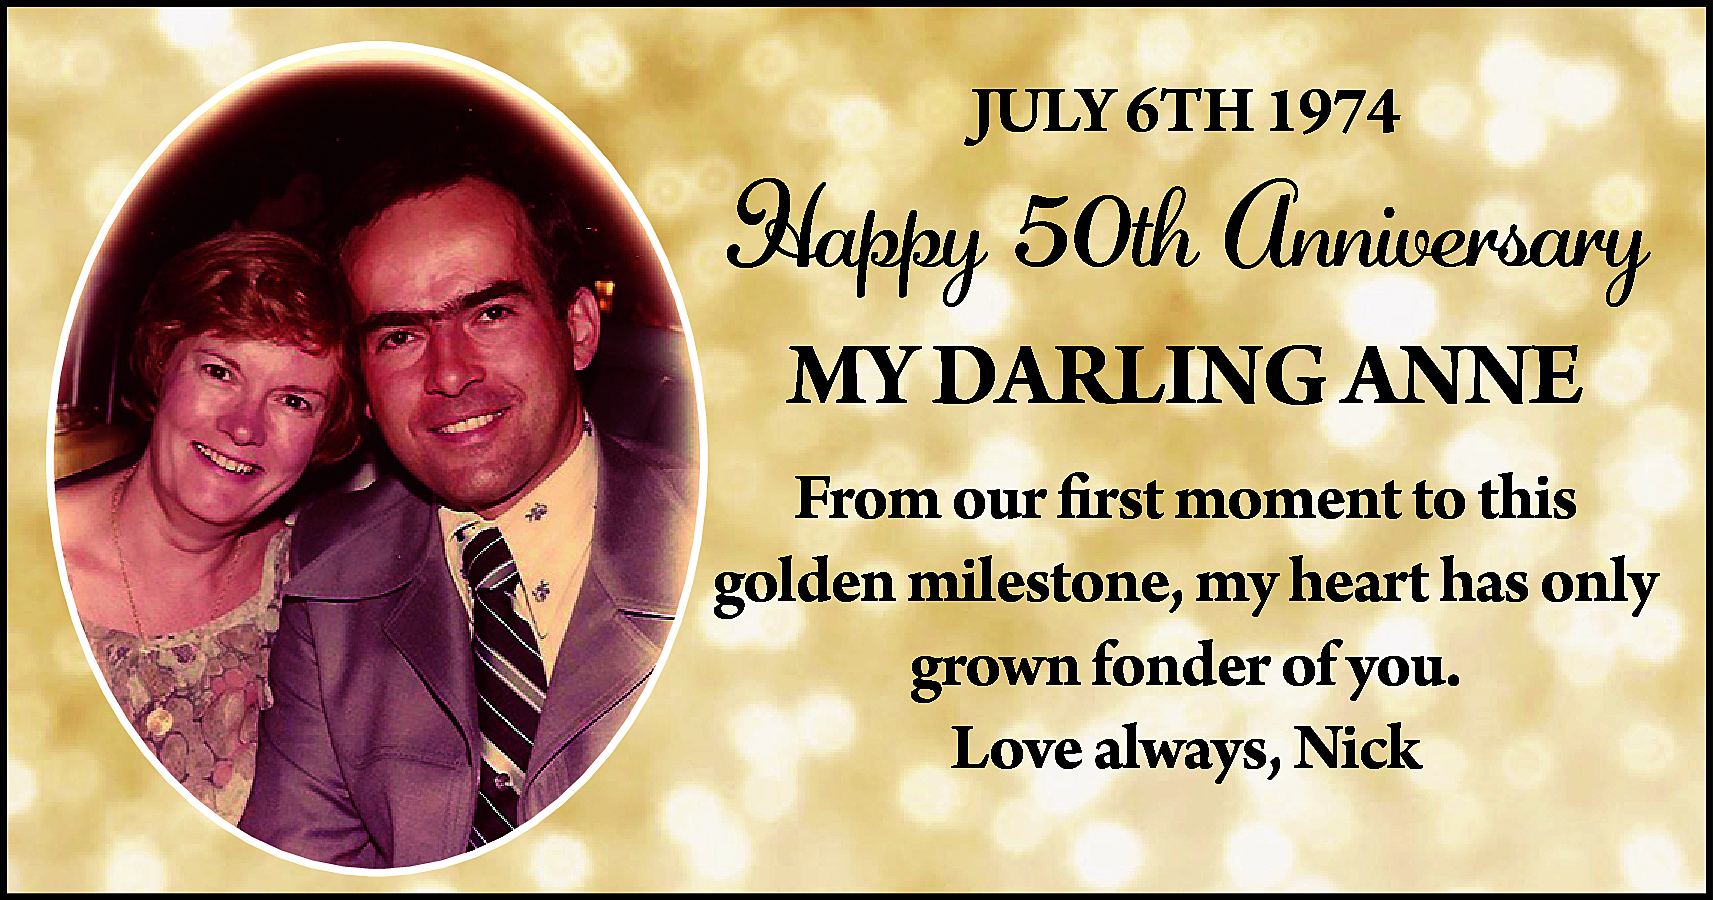 JULY 6TH 1974 <br> <br>Happy  JULY 6TH 1974    Happy 50th Anniversary  MY DARLING ANNE  From our first moment to this  golden milestone, my heart has only  grown fonder of you.  Love always, Nick    